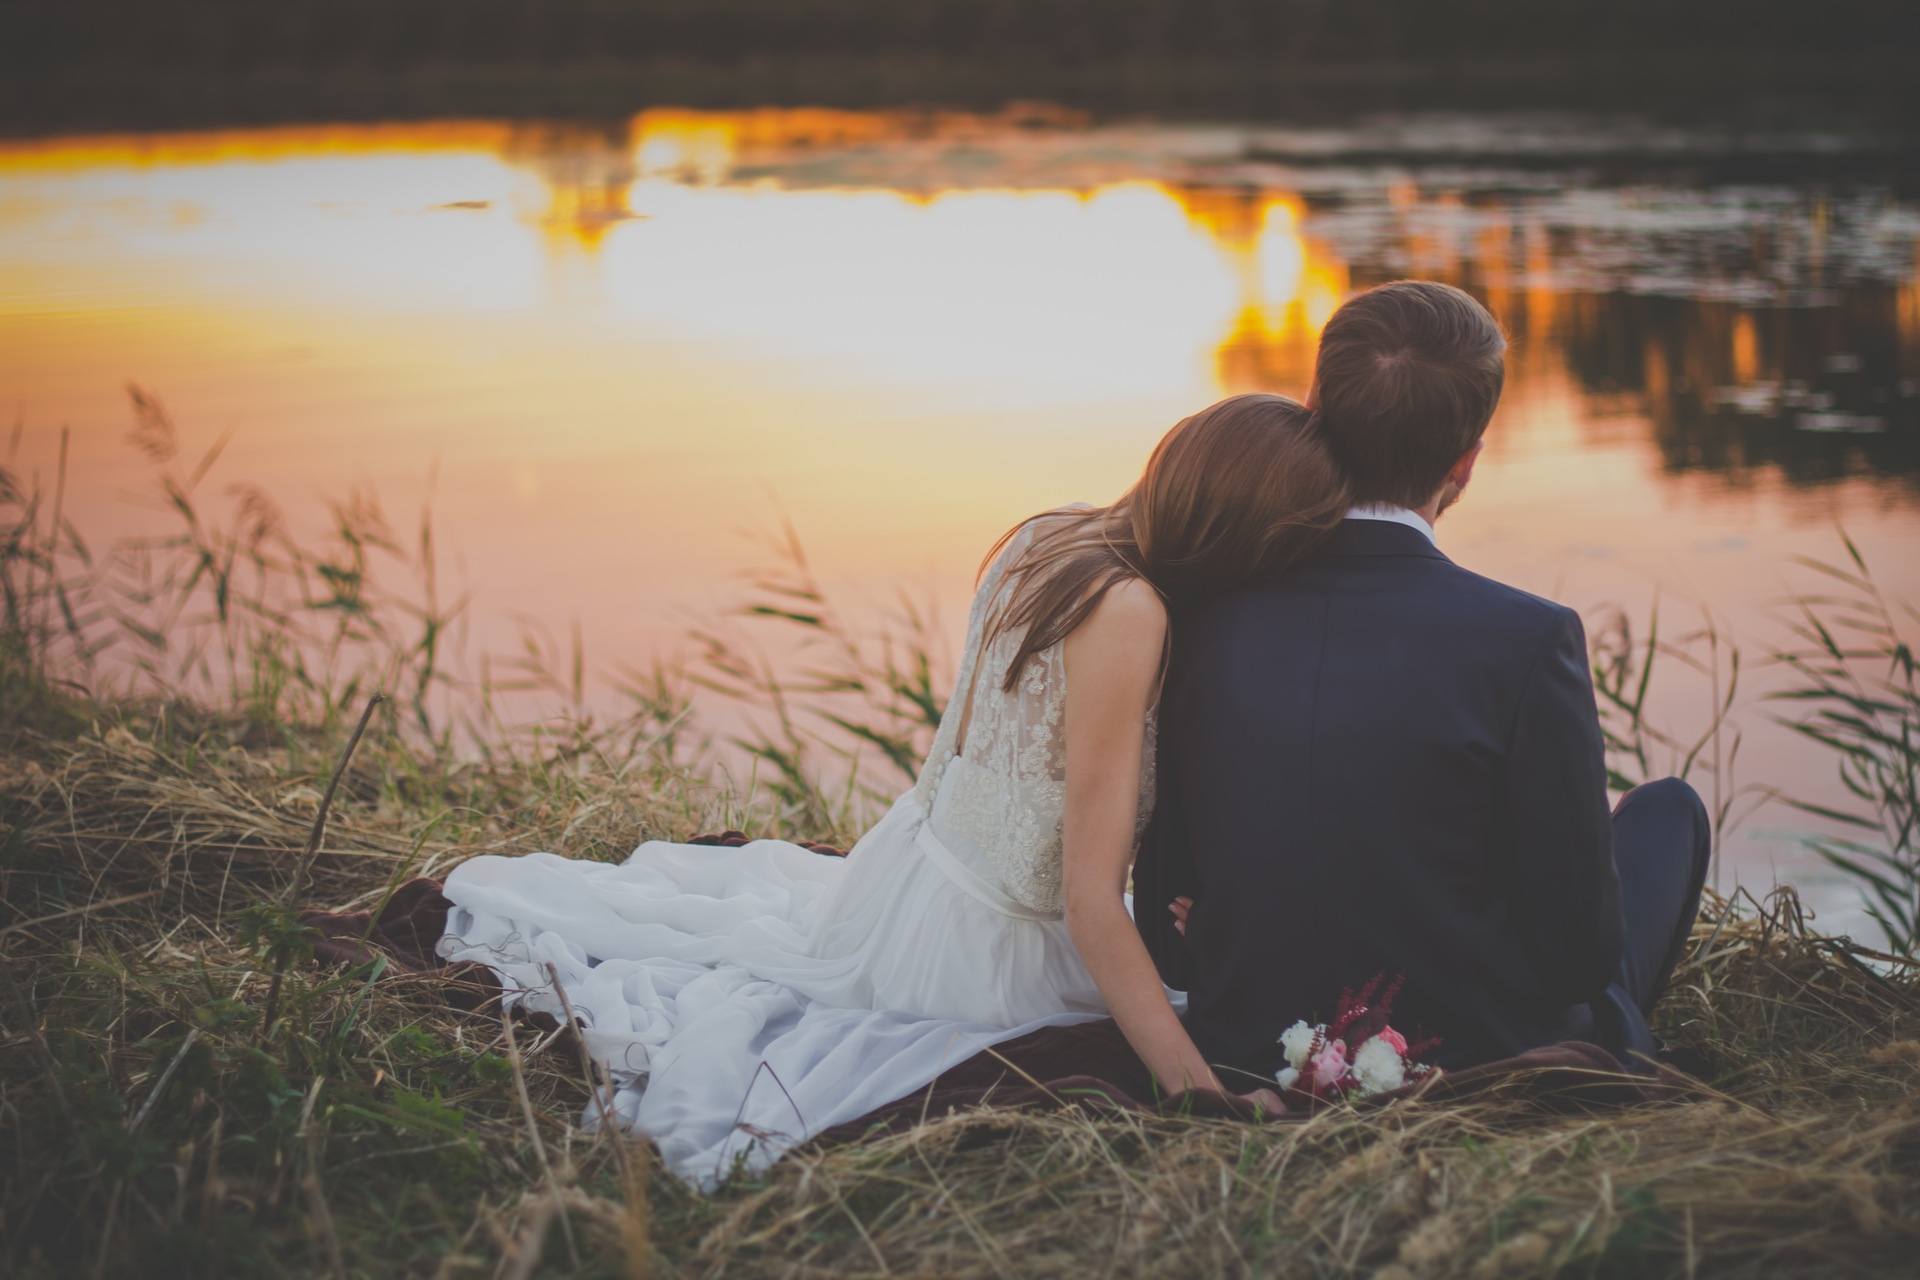 10 Brutally Honest Things Everyone Should Know Before Getting Married